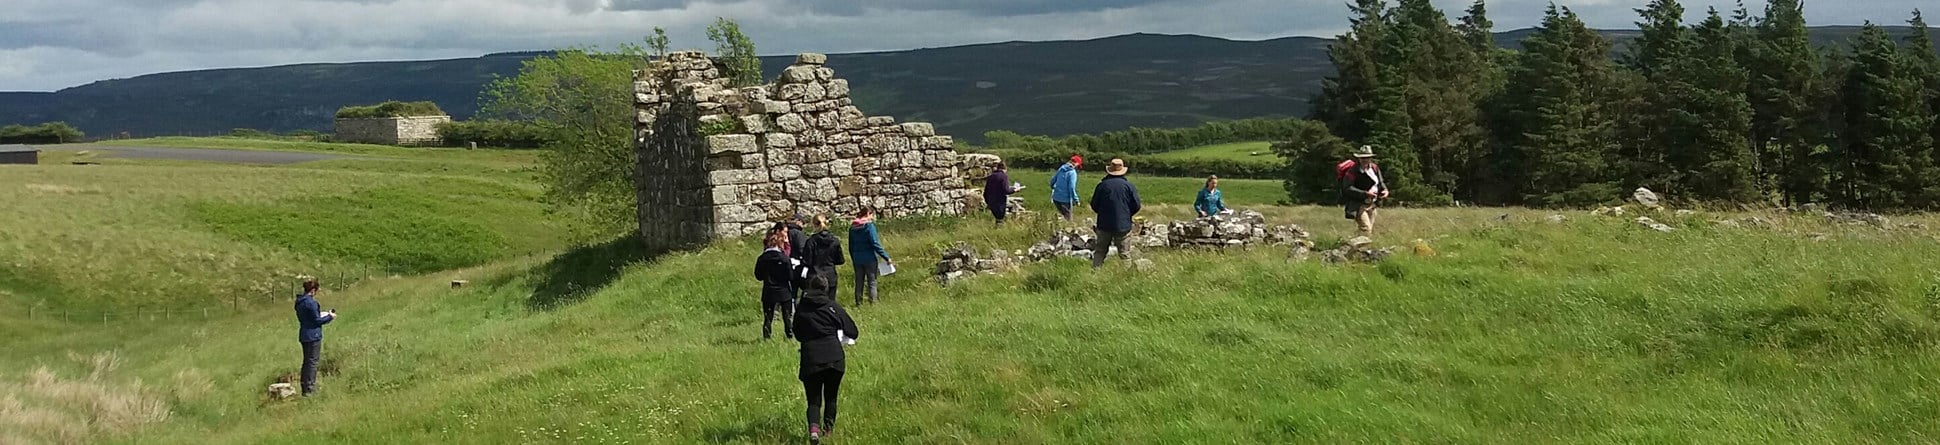 Several PhD students investigating a ruined bastle in the Northumberland landscape